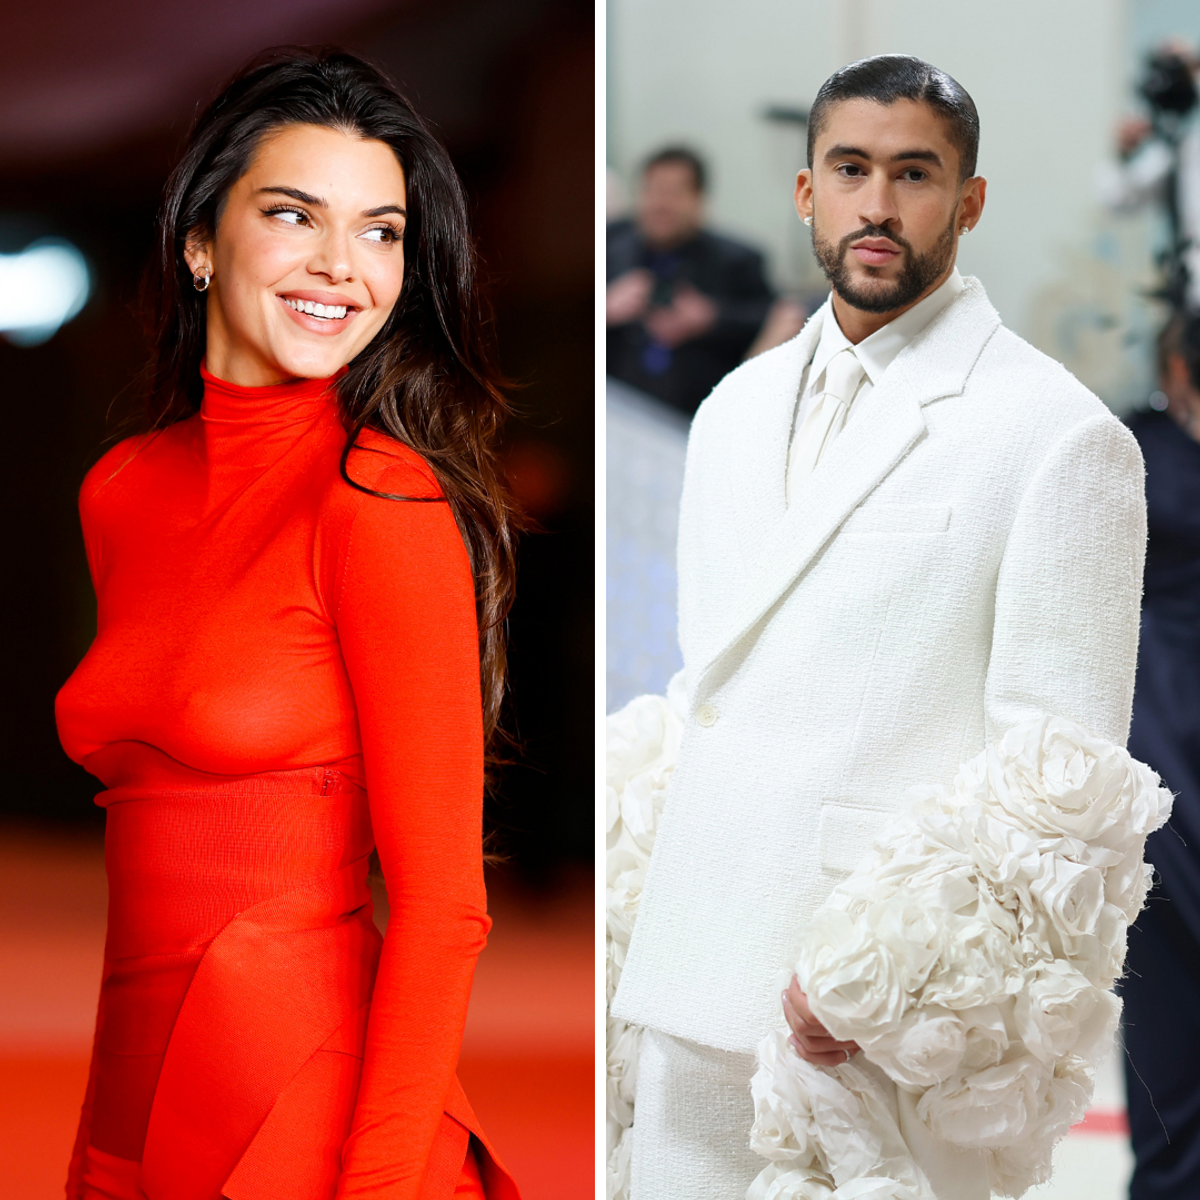 Kendall Jenner and Bad Bunny celebrity breakup